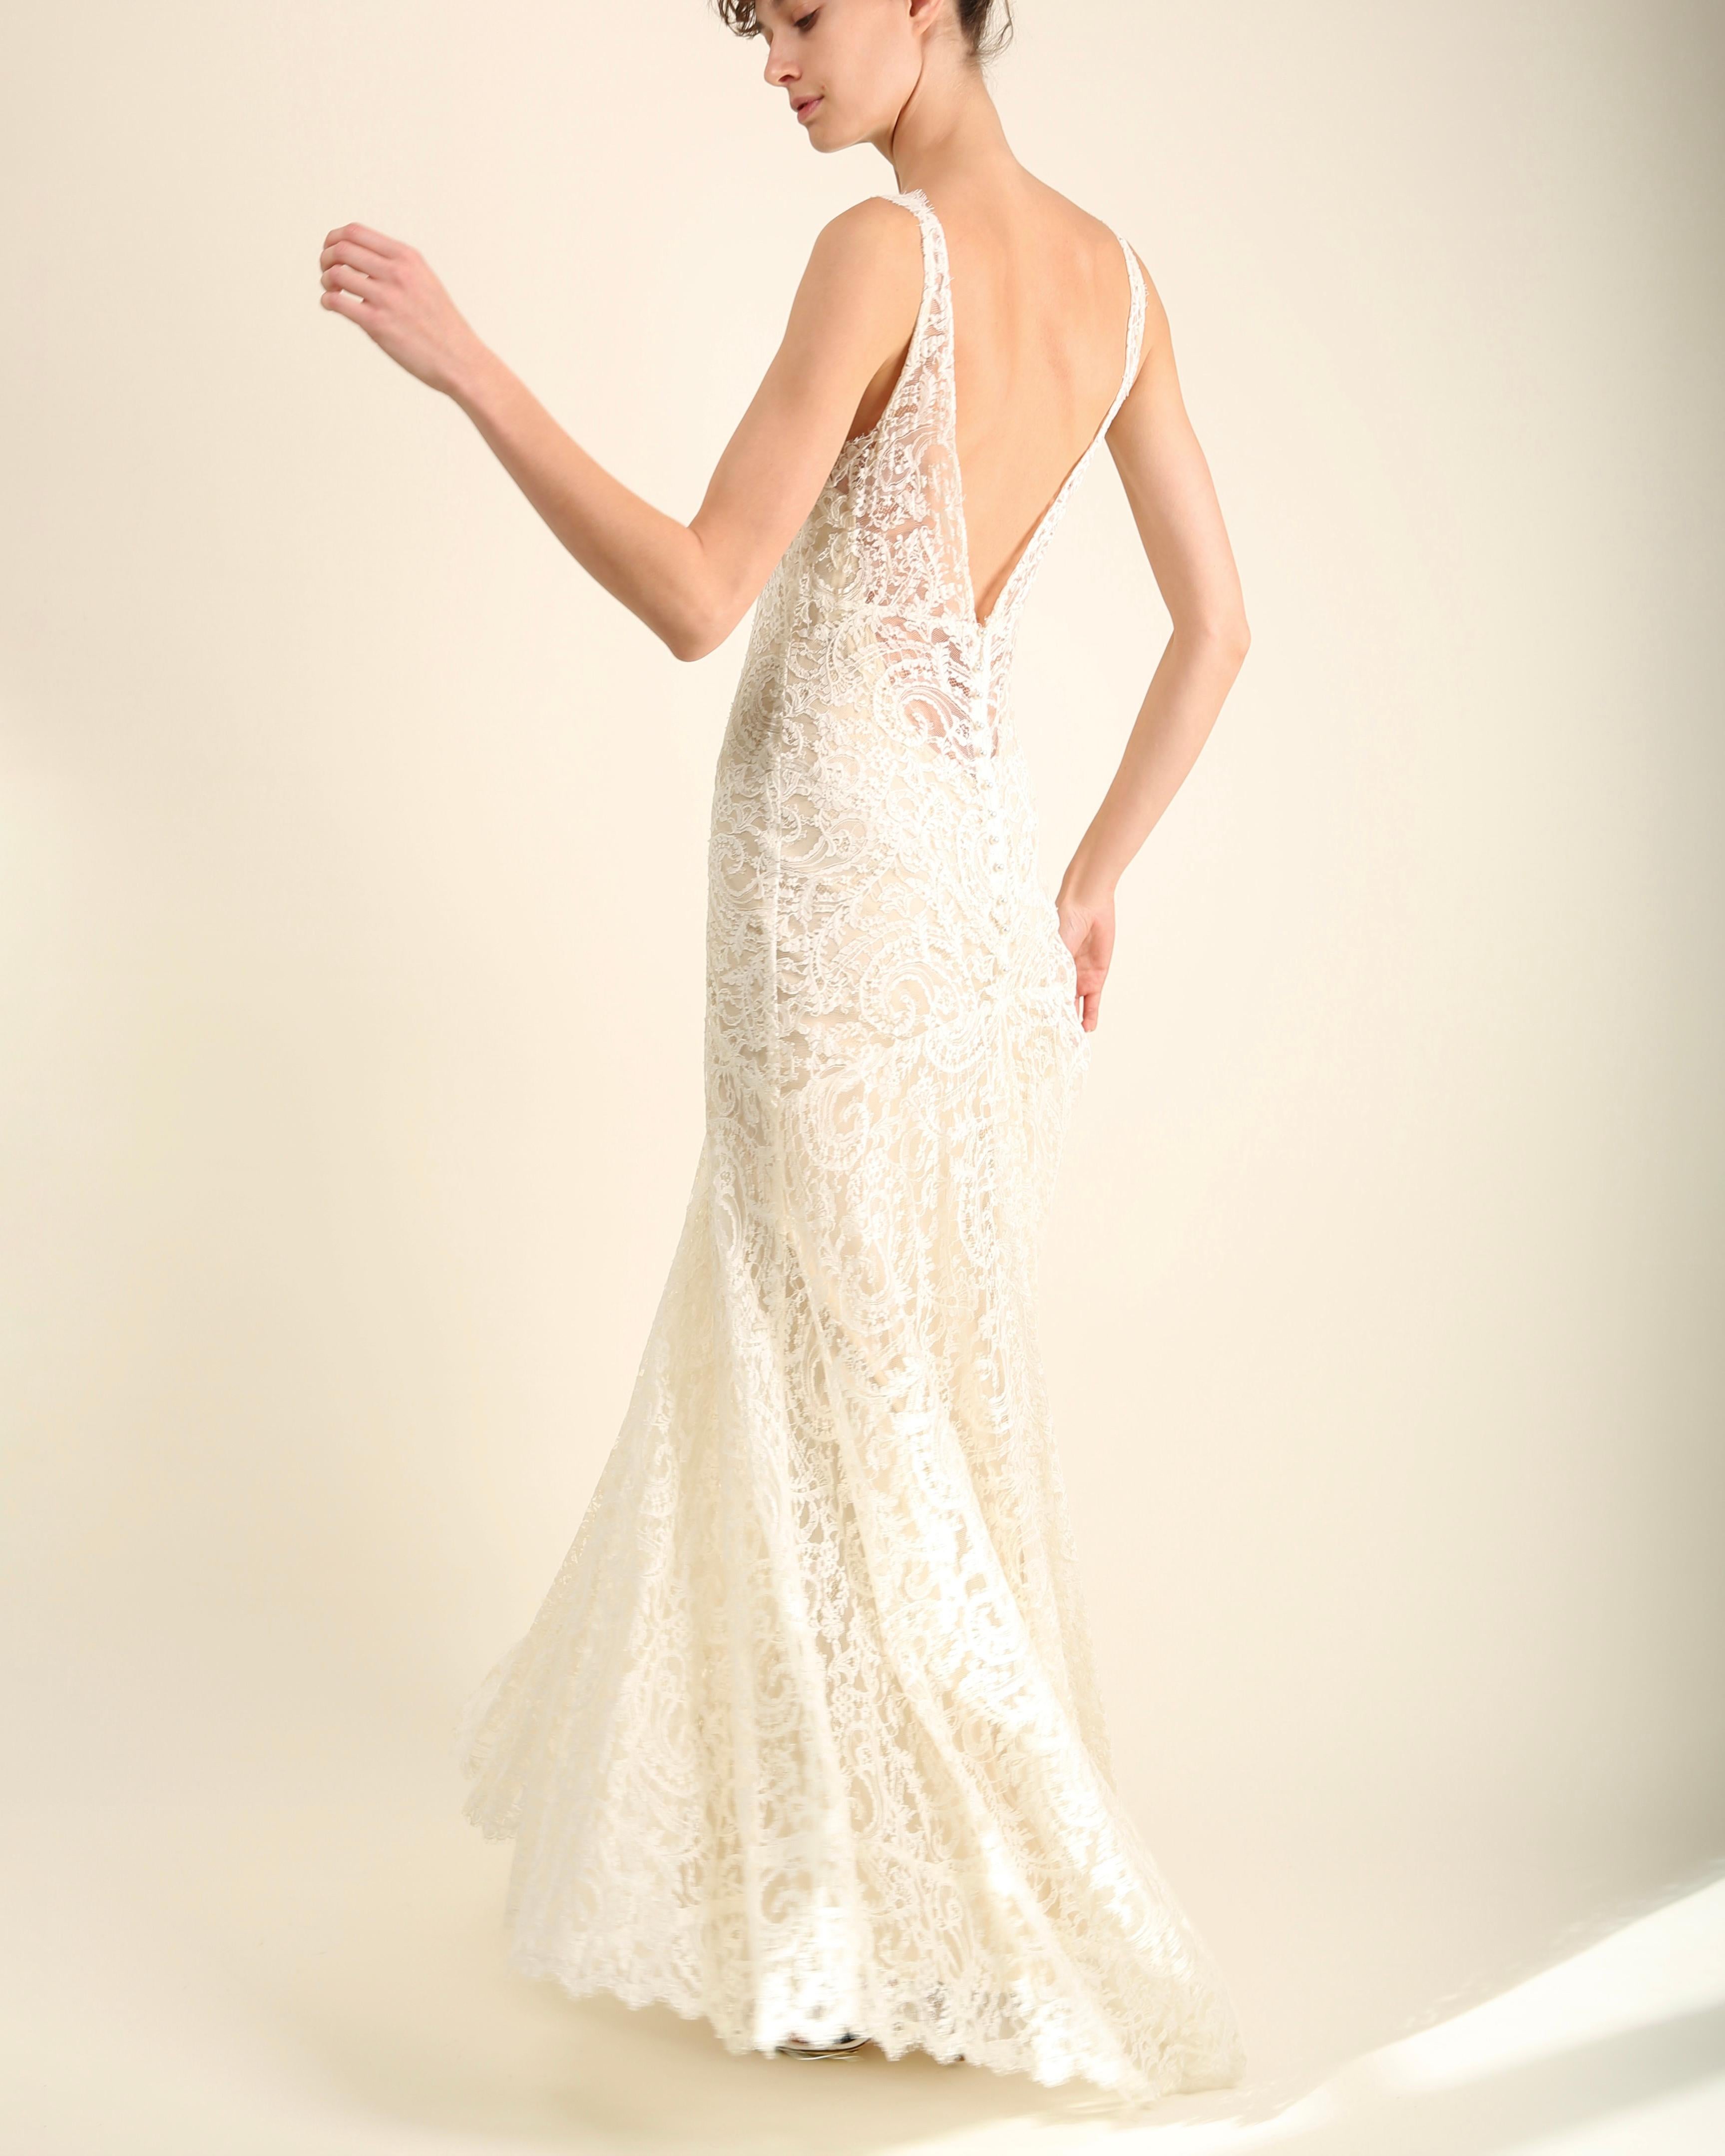 Monique Lhuillier ivory lace plunging backless wedding gown with train dress  4